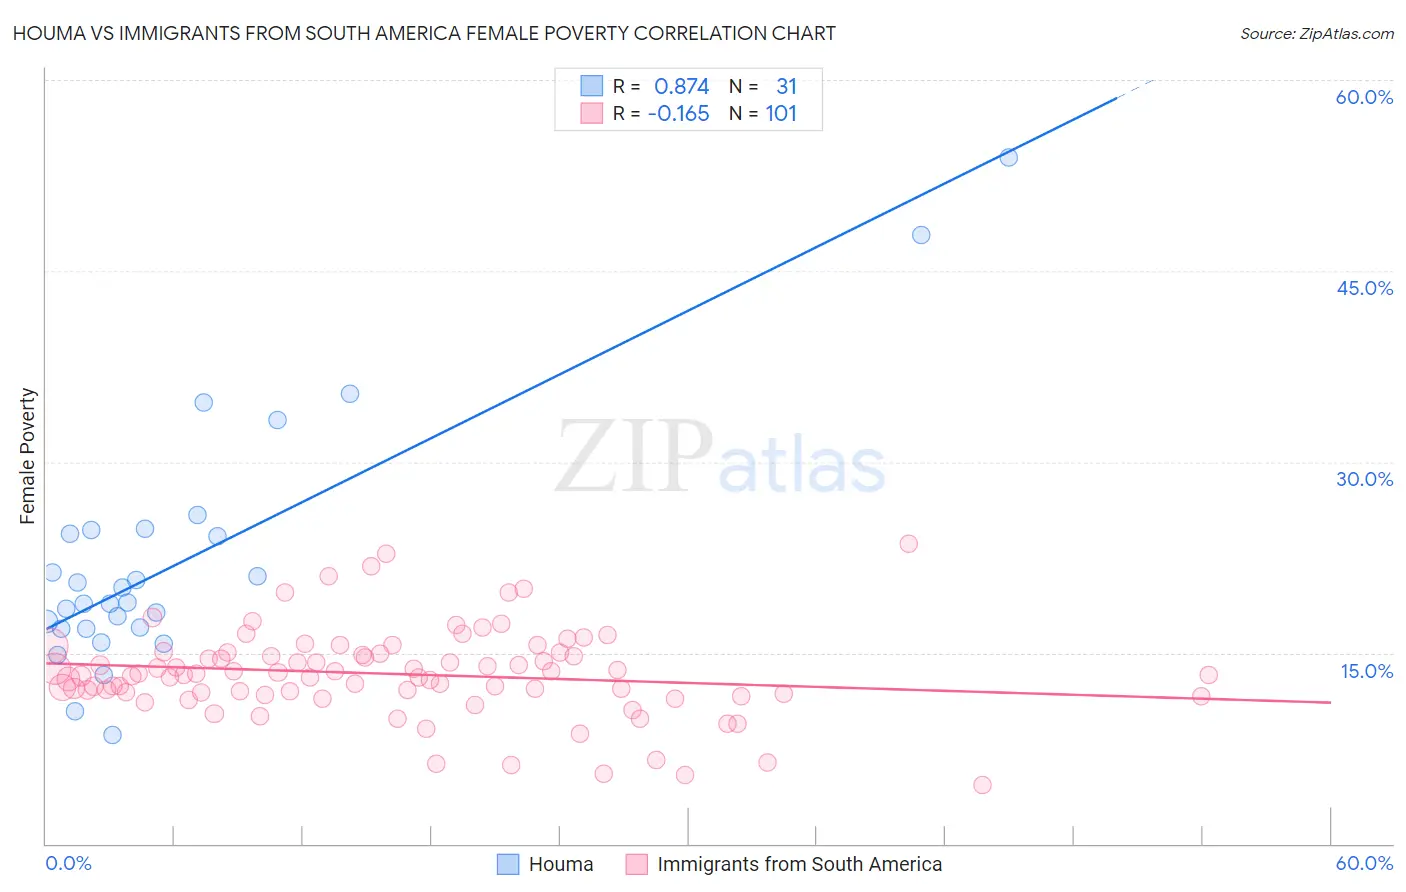 Houma vs Immigrants from South America Female Poverty